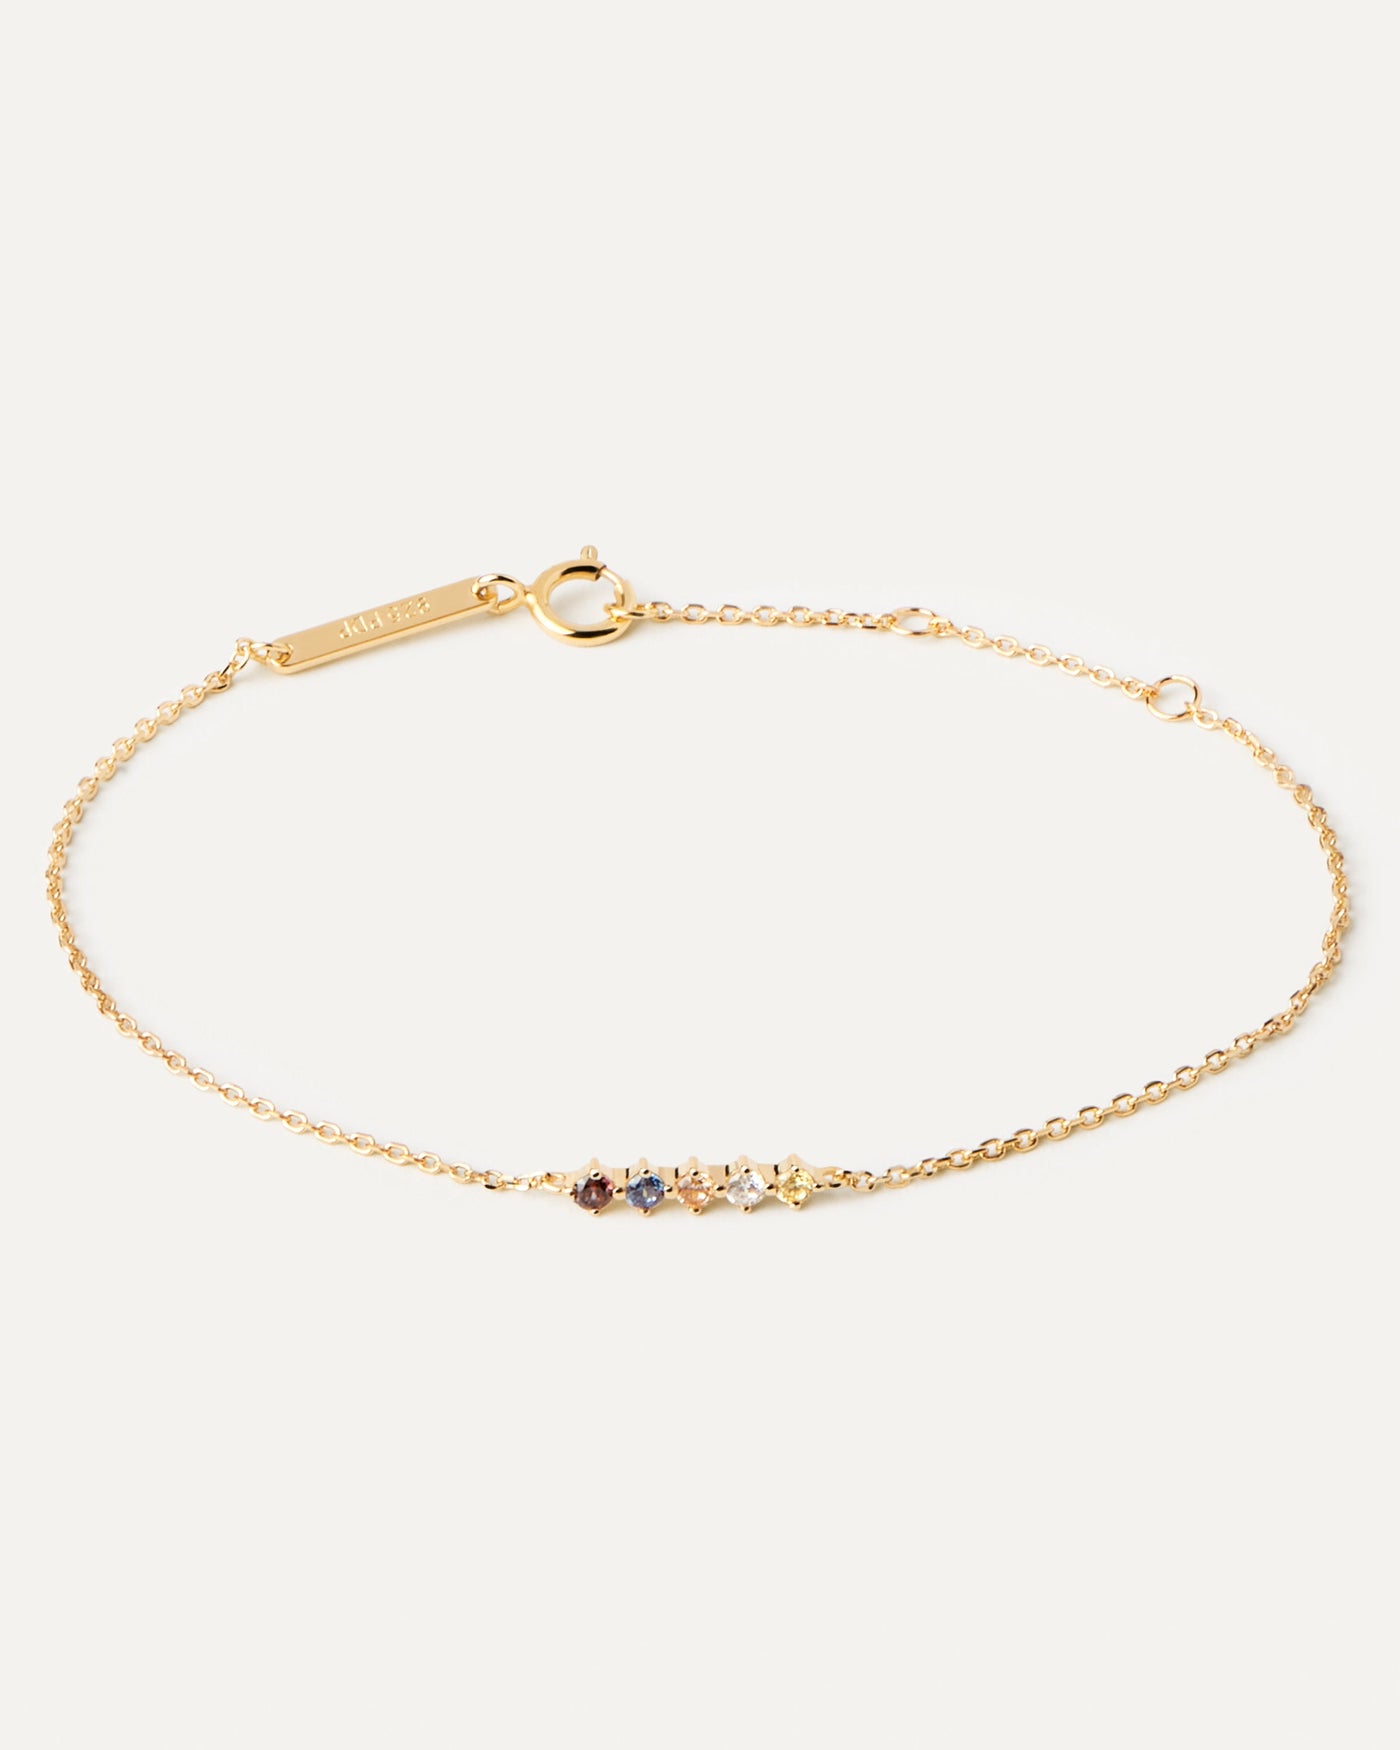 2023 Selection | Sage Bracelet. Gold-plated silver bracelet with dainty zirconia of five different colors. Get the latest arrival from PDPAOLA. Place your order safely and get this Best Seller. Free Shipping.